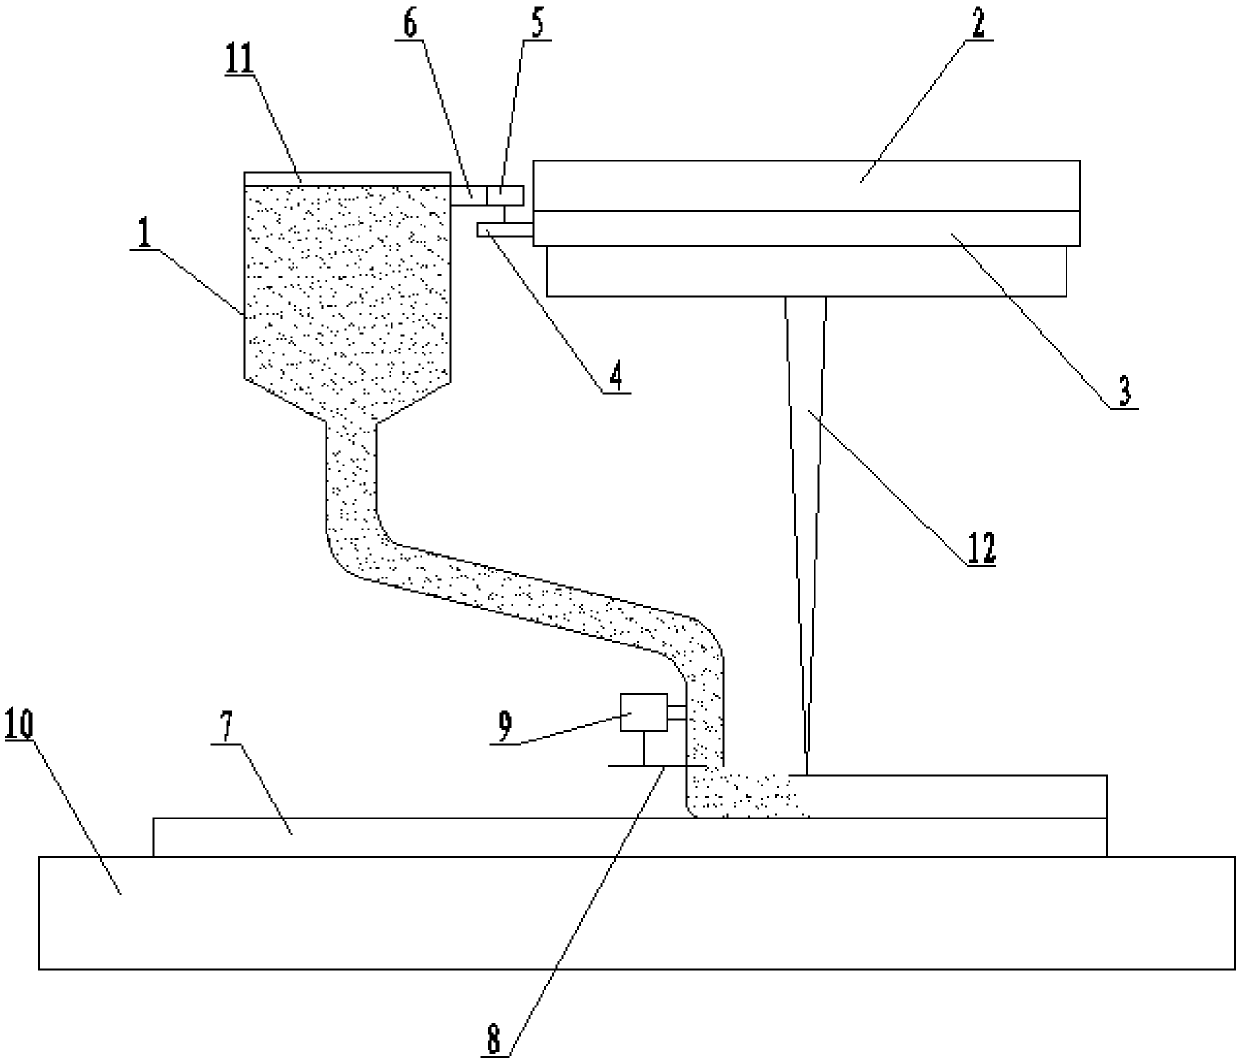 A pre-powder feeding type electron beam additive manufacturing device